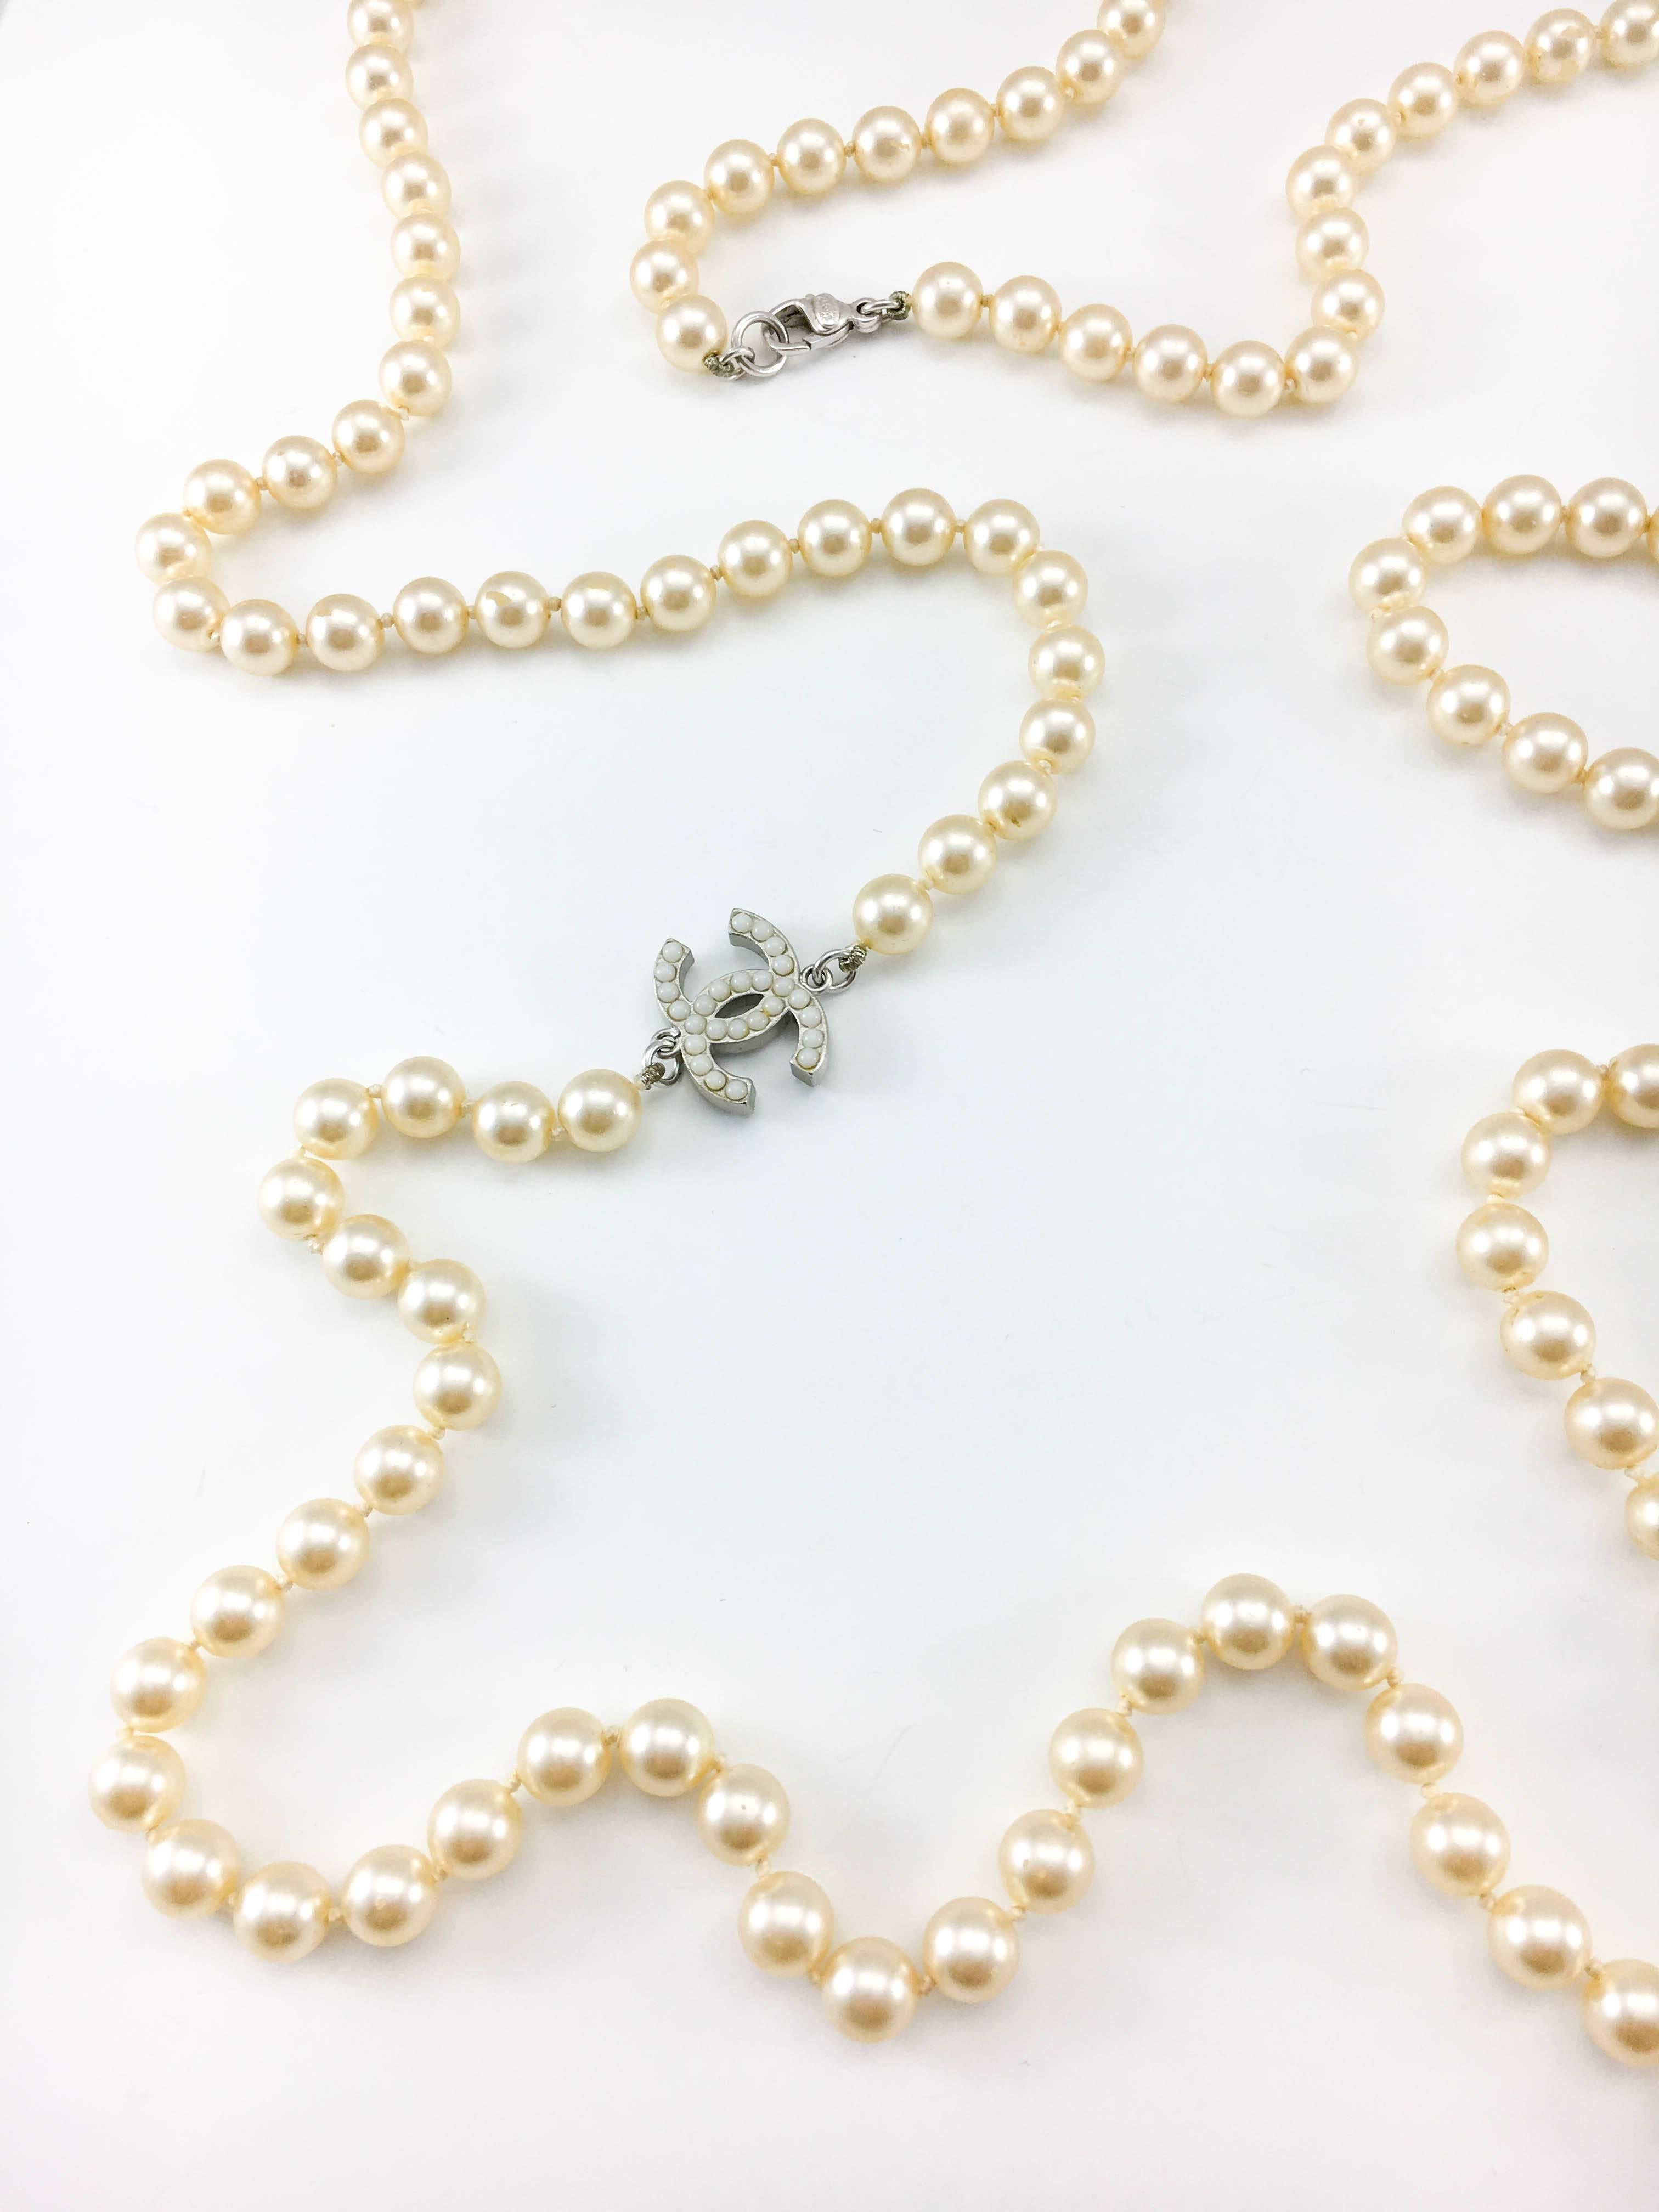 2008 Chanel Long Pearl Sautoir Necklace with 3 Inset Pearl 'CC' Logos 5